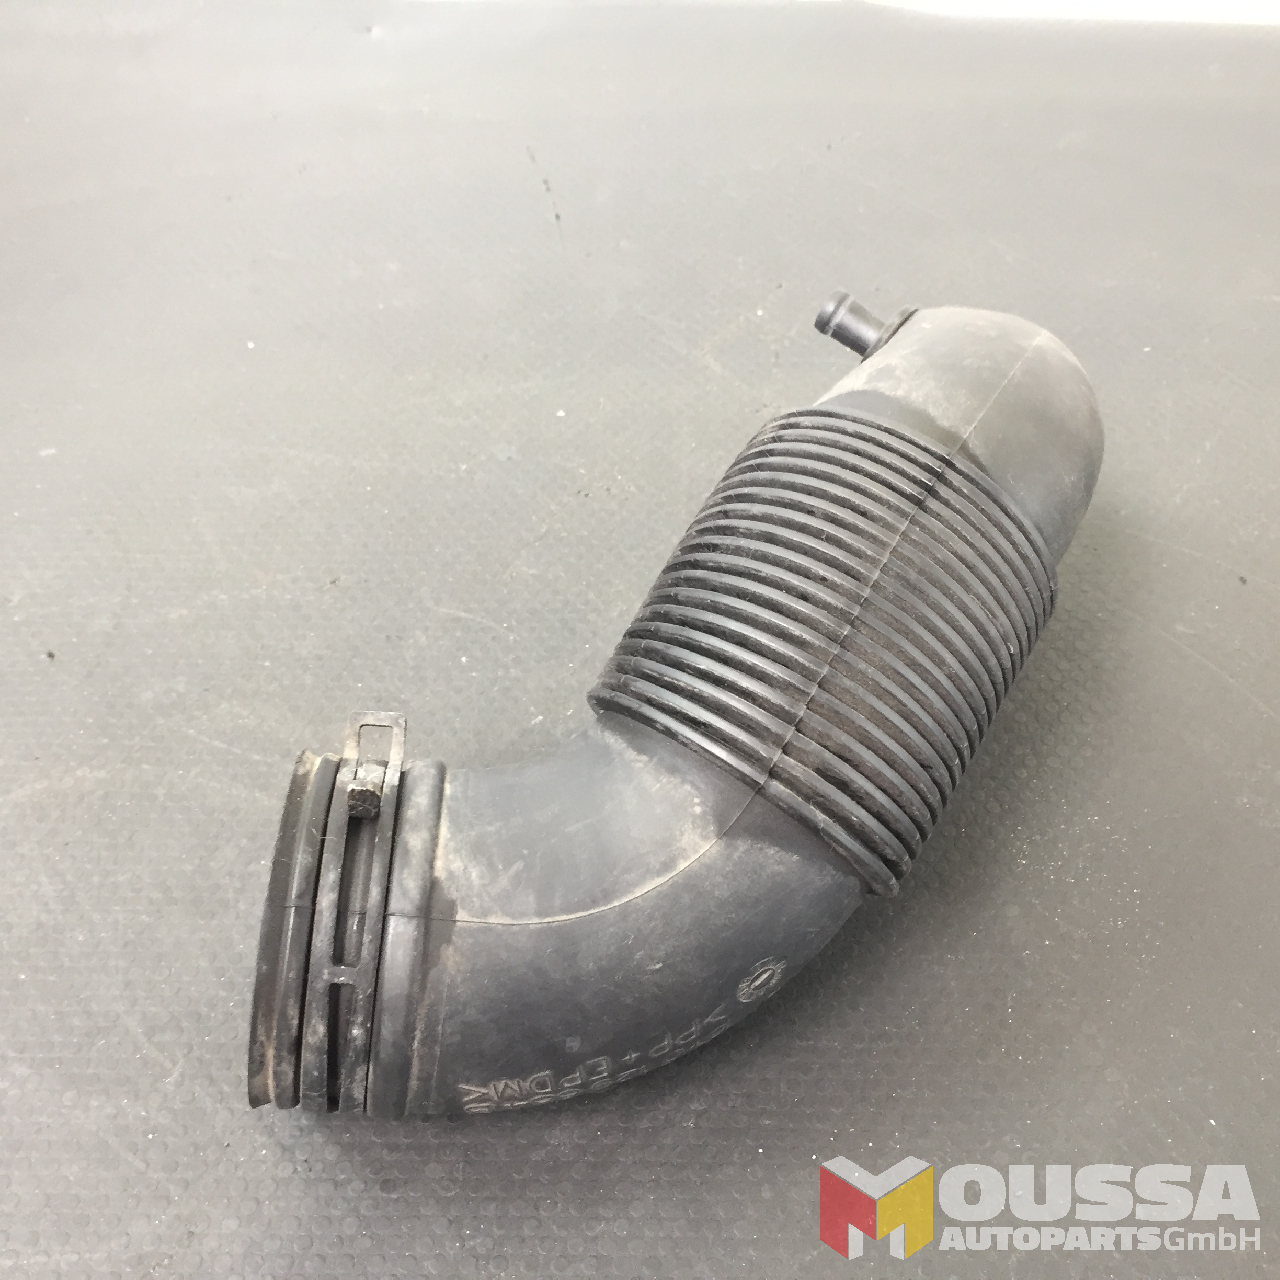 MOUSSA-AUTOPARTS-64a5eeccd1f57.jpg